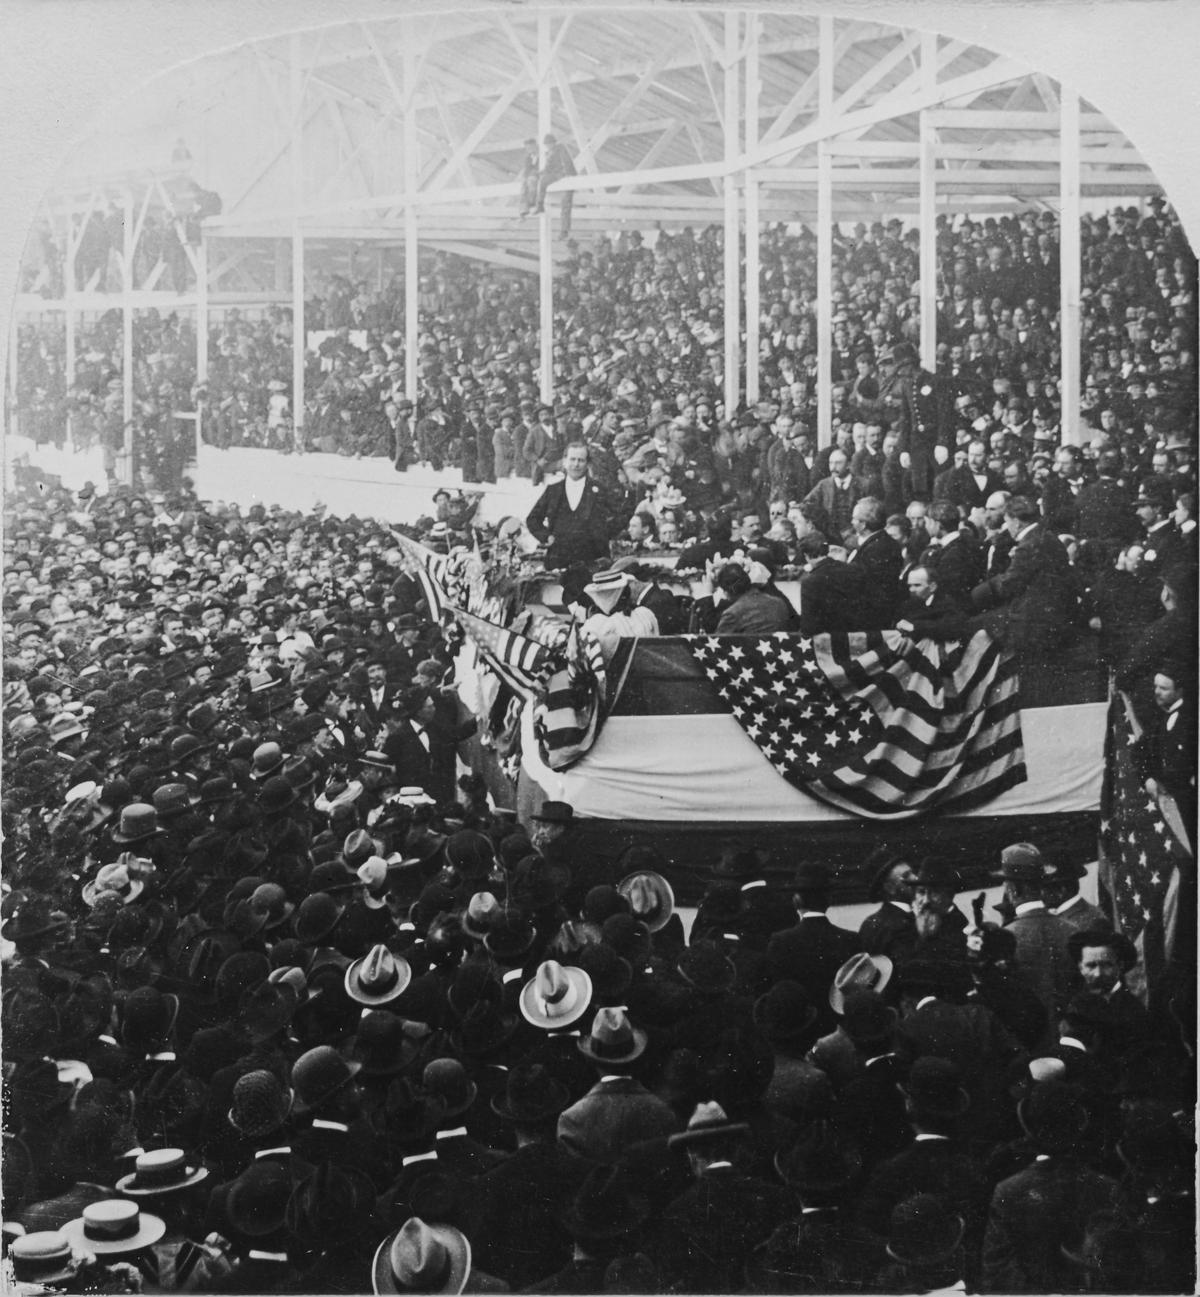 A stereoscopic image shows American politician and lawyer William Jennings Bryan addressing the Christian Endeavour Convention in San Francisco in June 1897. (Keystone View Company/Graphic House/Archive Photos/Getty Images)